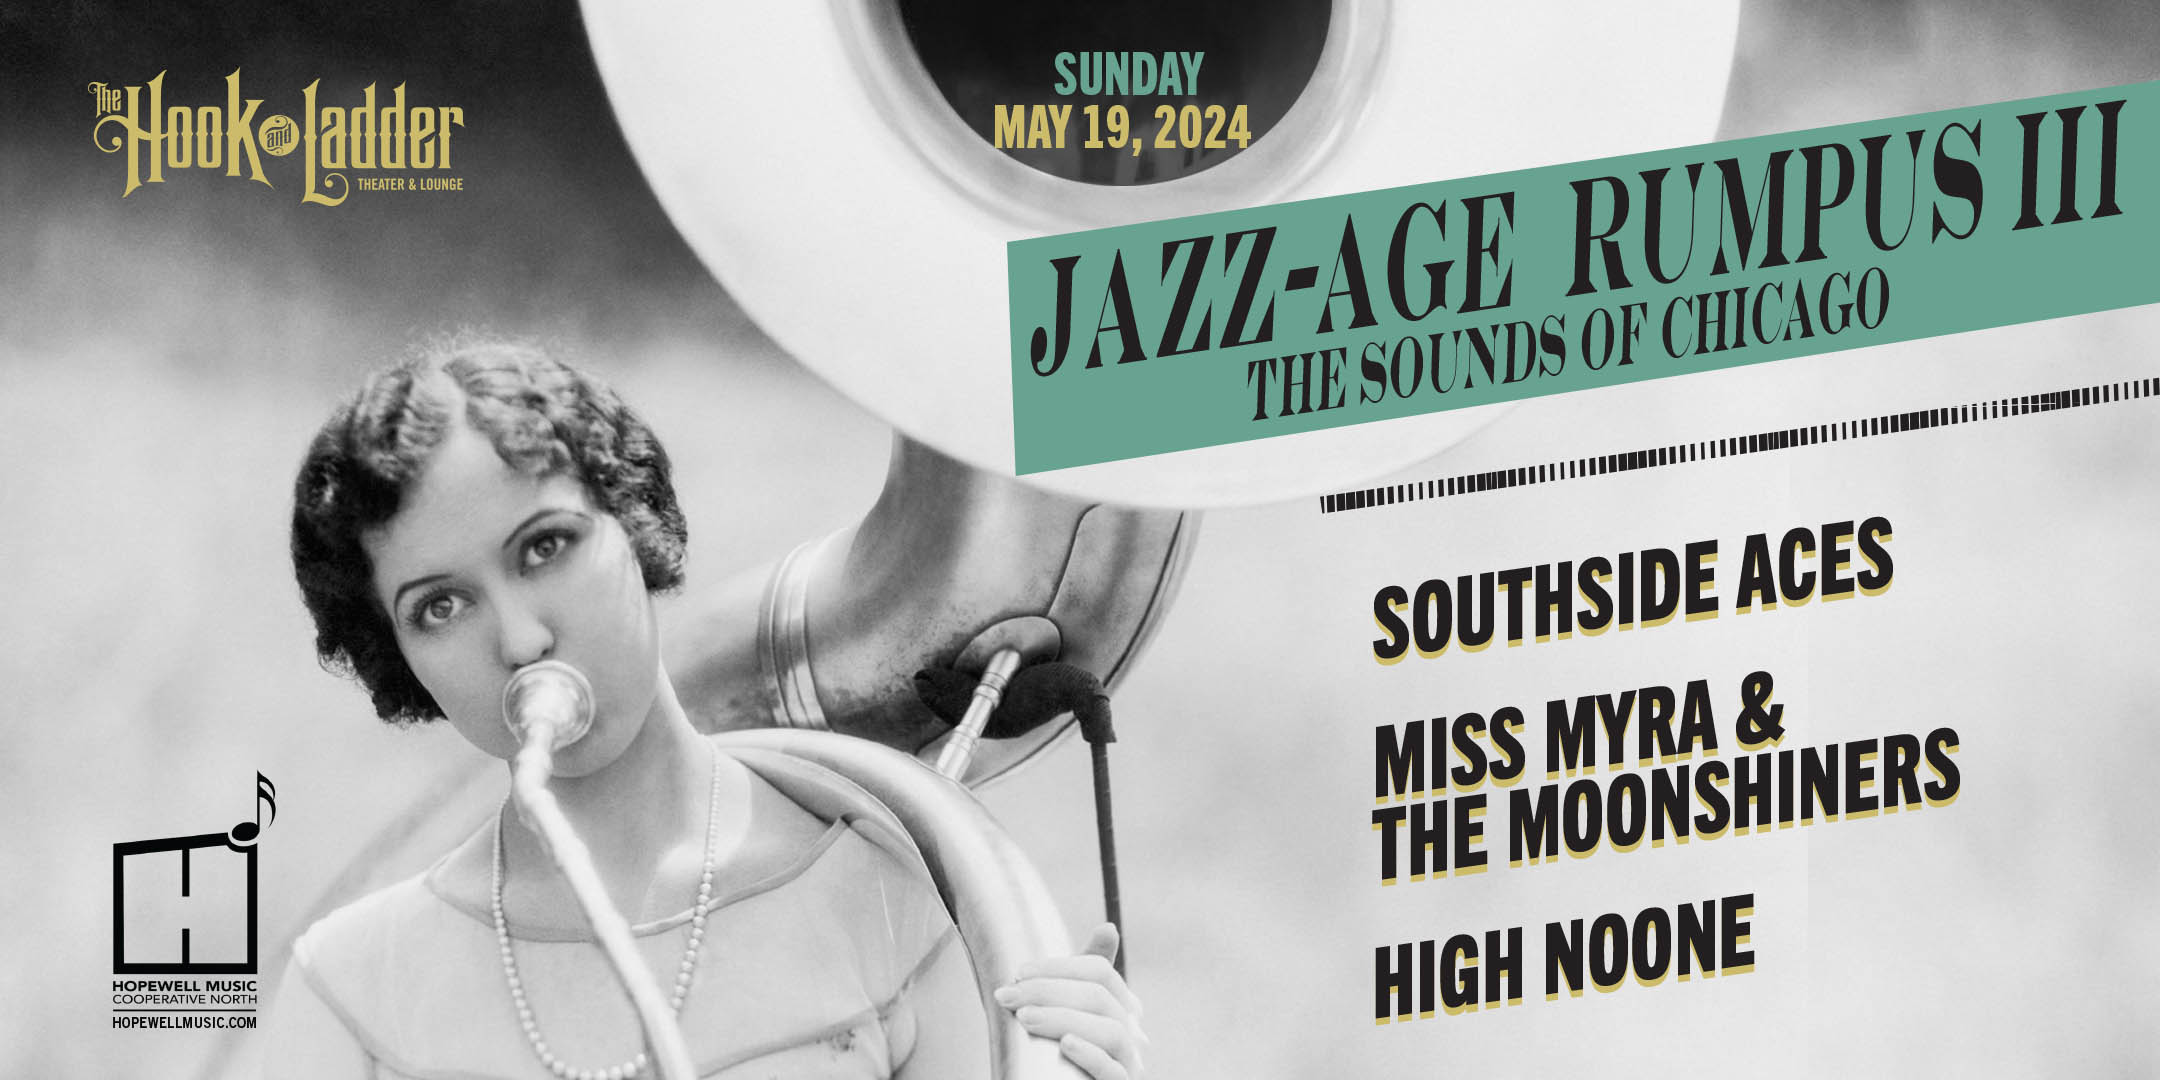 Jazz Age Rumpus III: The Sounds of Chicago Featuring Southside Aces, Miss Myra & The Moonshiners, & High Noon The Hook and Ladder Theater Doors 2:30pm : Music 3:00pm General Admission: $15 EARLY/$20 ADV/$25 DOS 21+